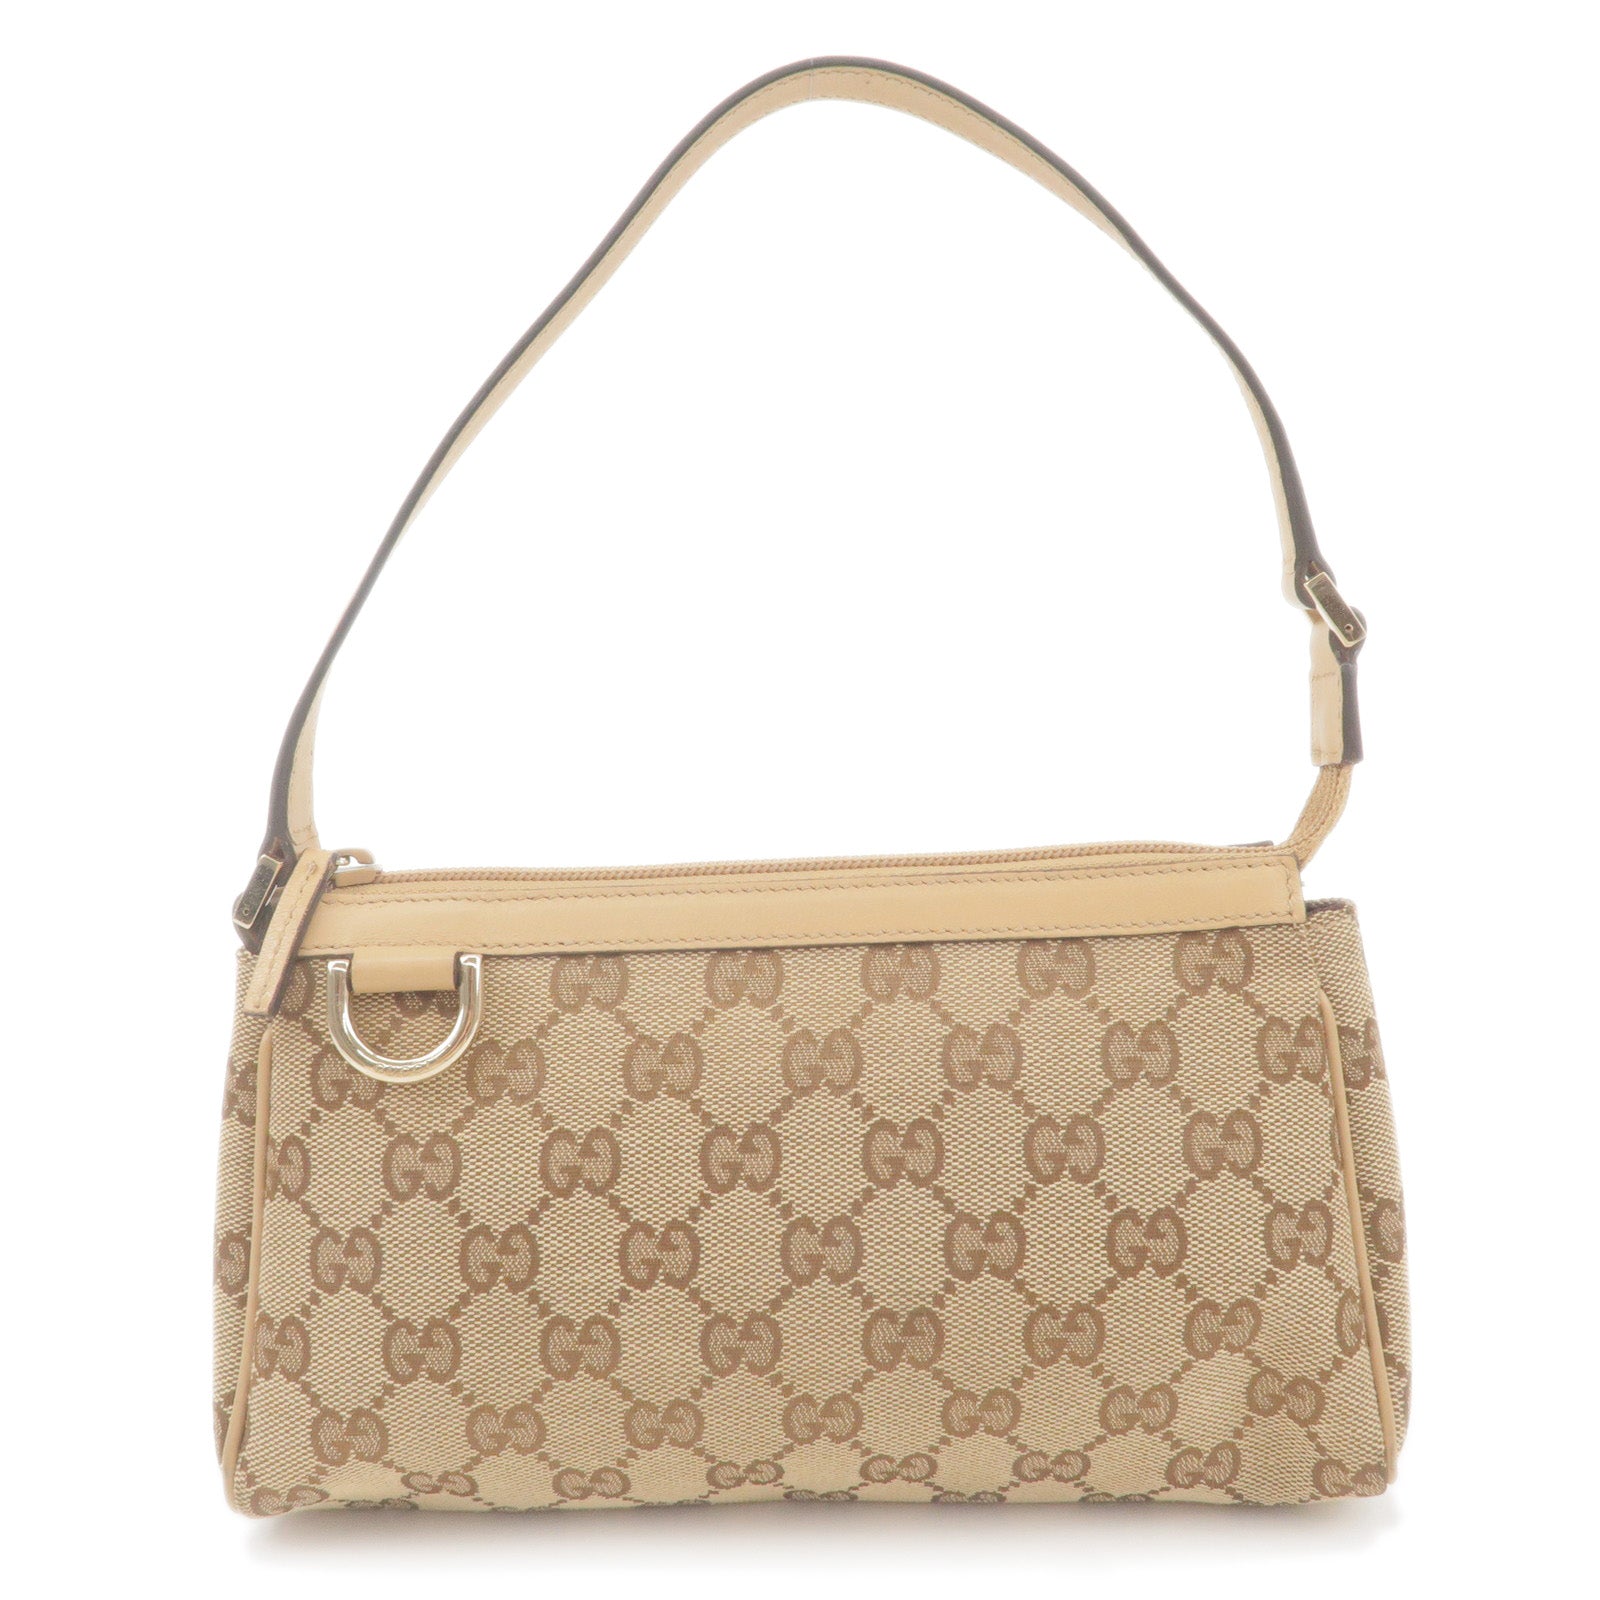 GUCCI-Abbey-GG-Canvas-Leather-Hand-Bag-Beige-Brown-145750